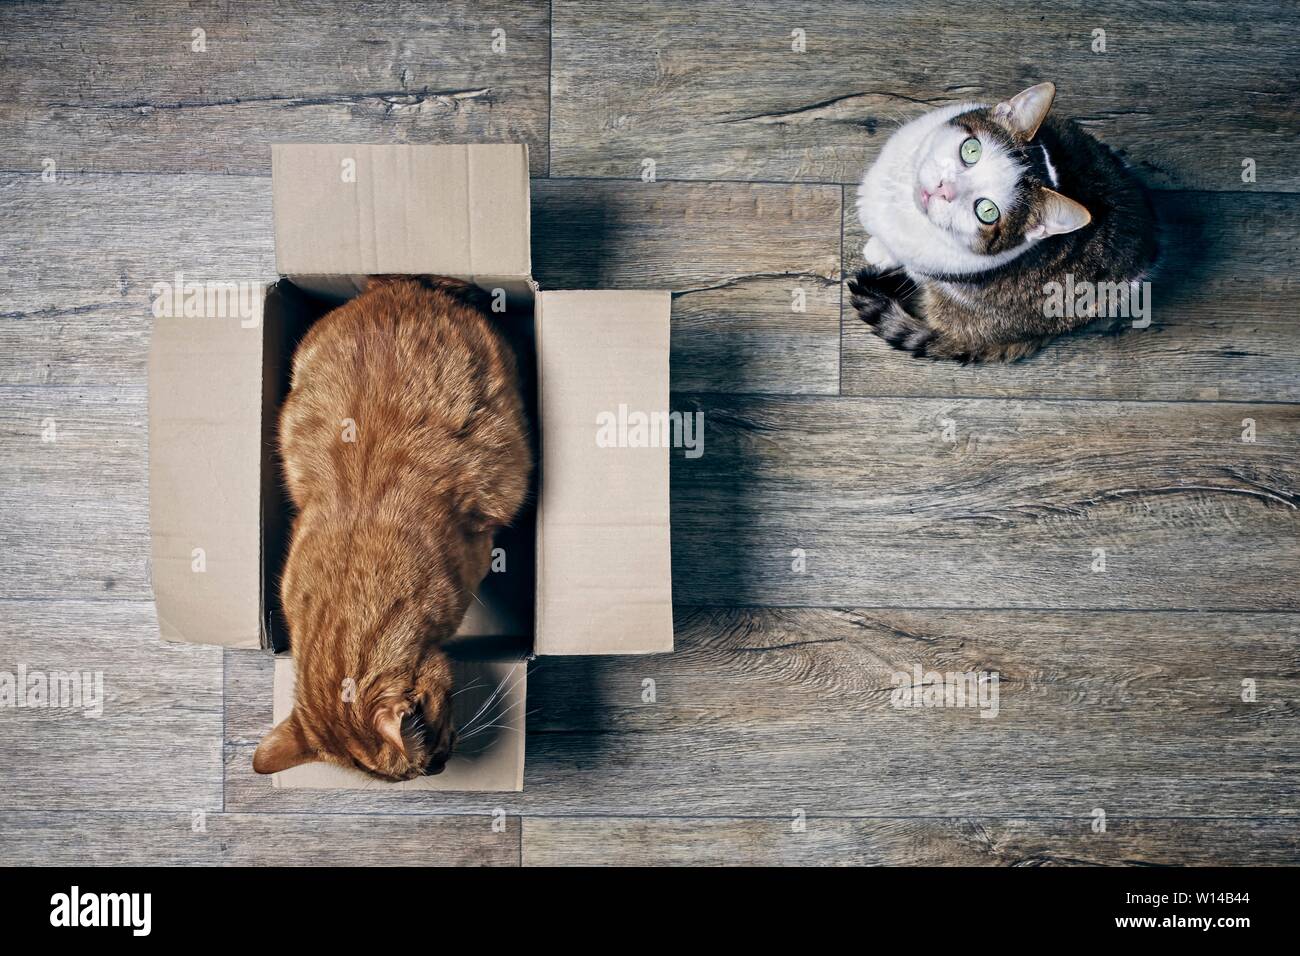 Two cute cats playing with a cardboartd box seen from a high angle view on a wooden background. Stock Photo